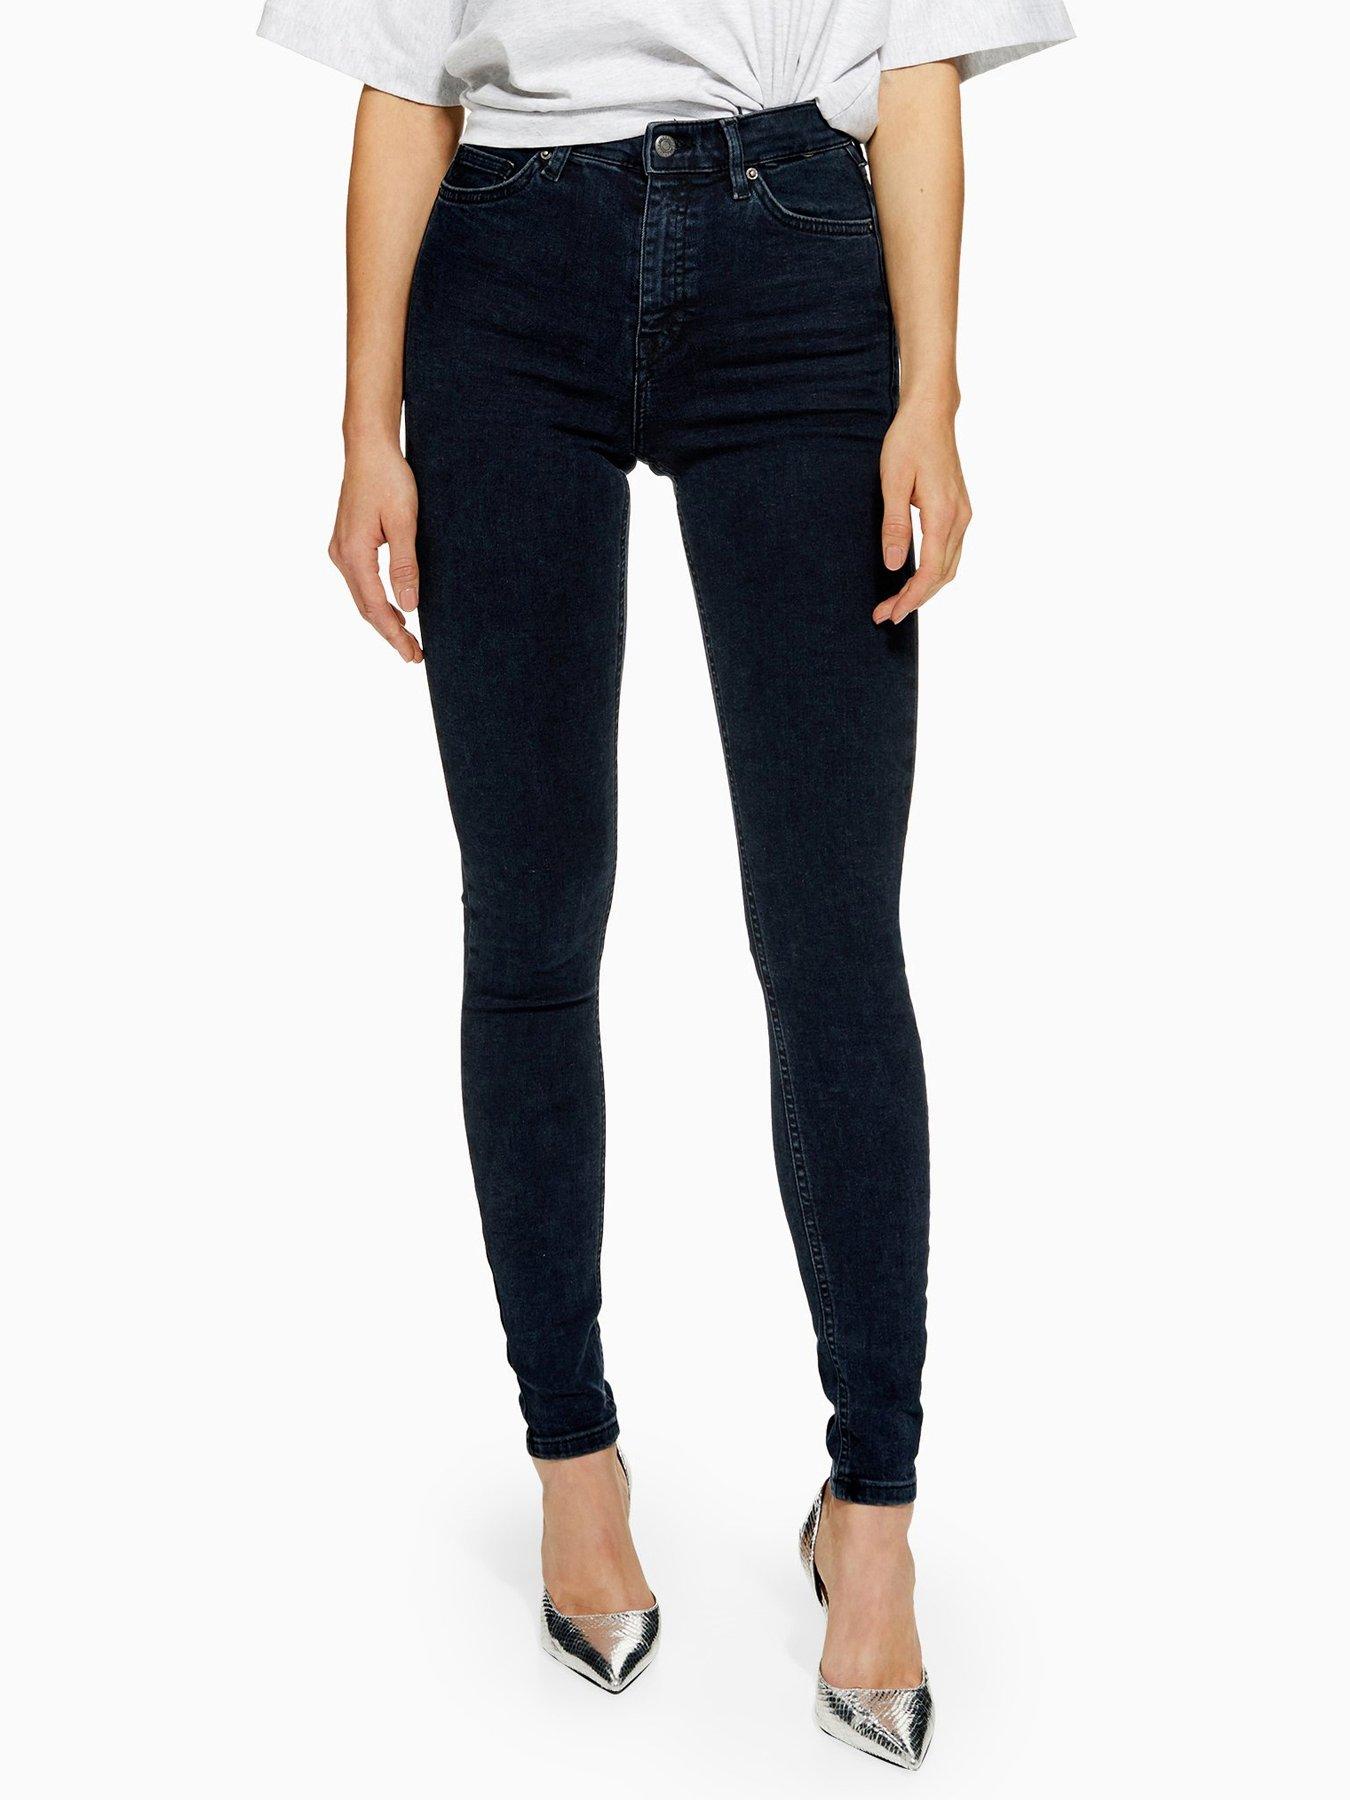 topshop ankle jeans